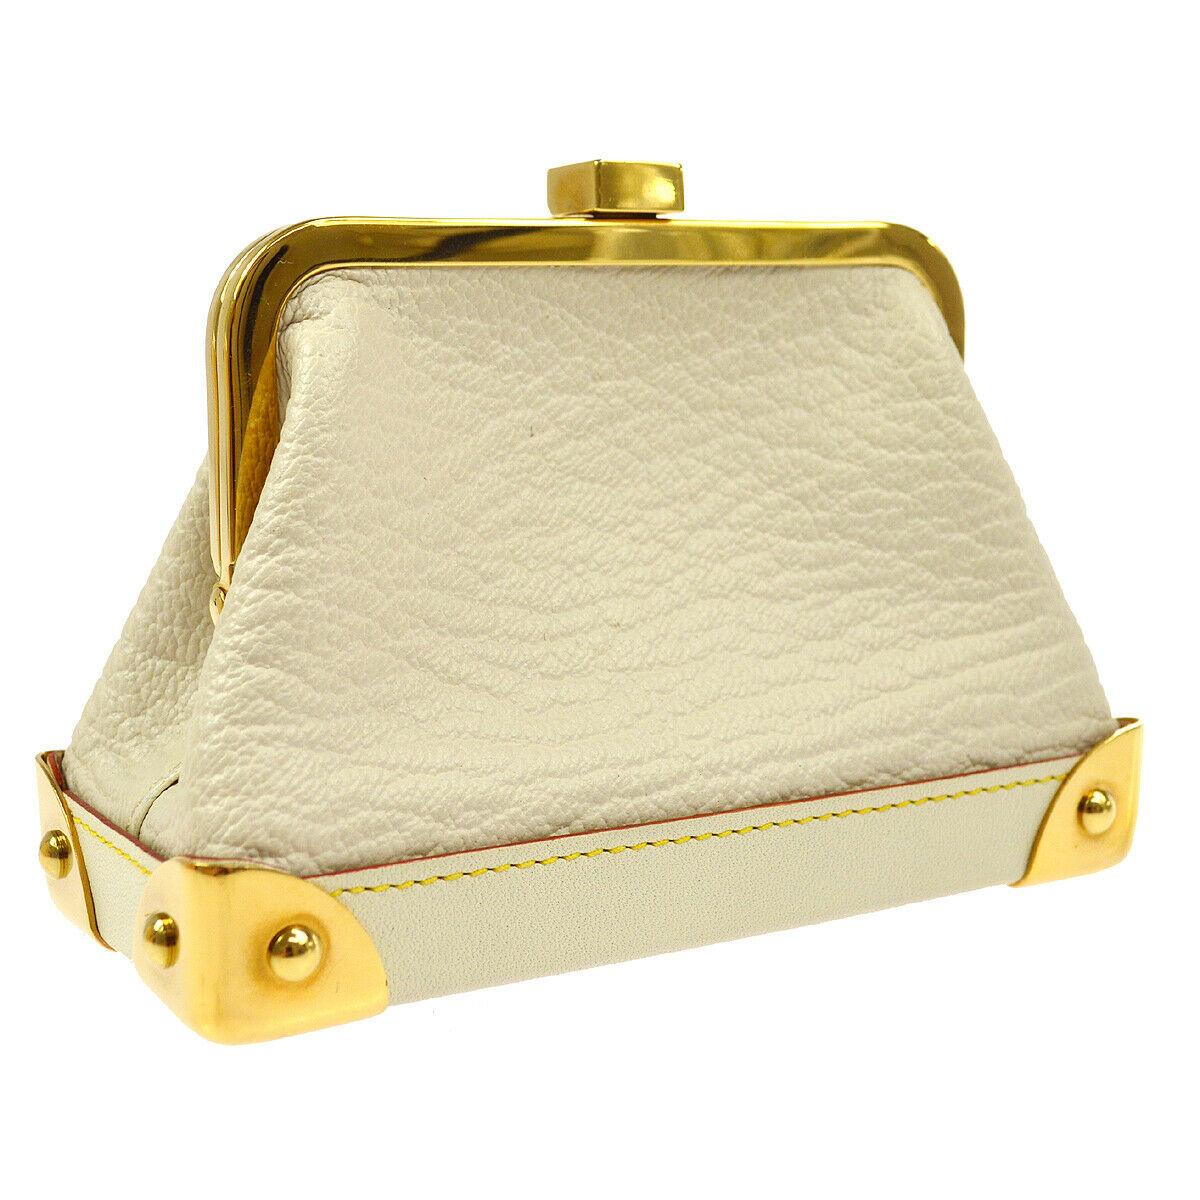 Louis Vuitton Leather Gold Small Mini Top Handle Kisslock Cosmetic Bag in Box 

Leather
Gold tone hardware
Leather lining
Kisslock closure
Date code present
Made in France
Measures 4.75